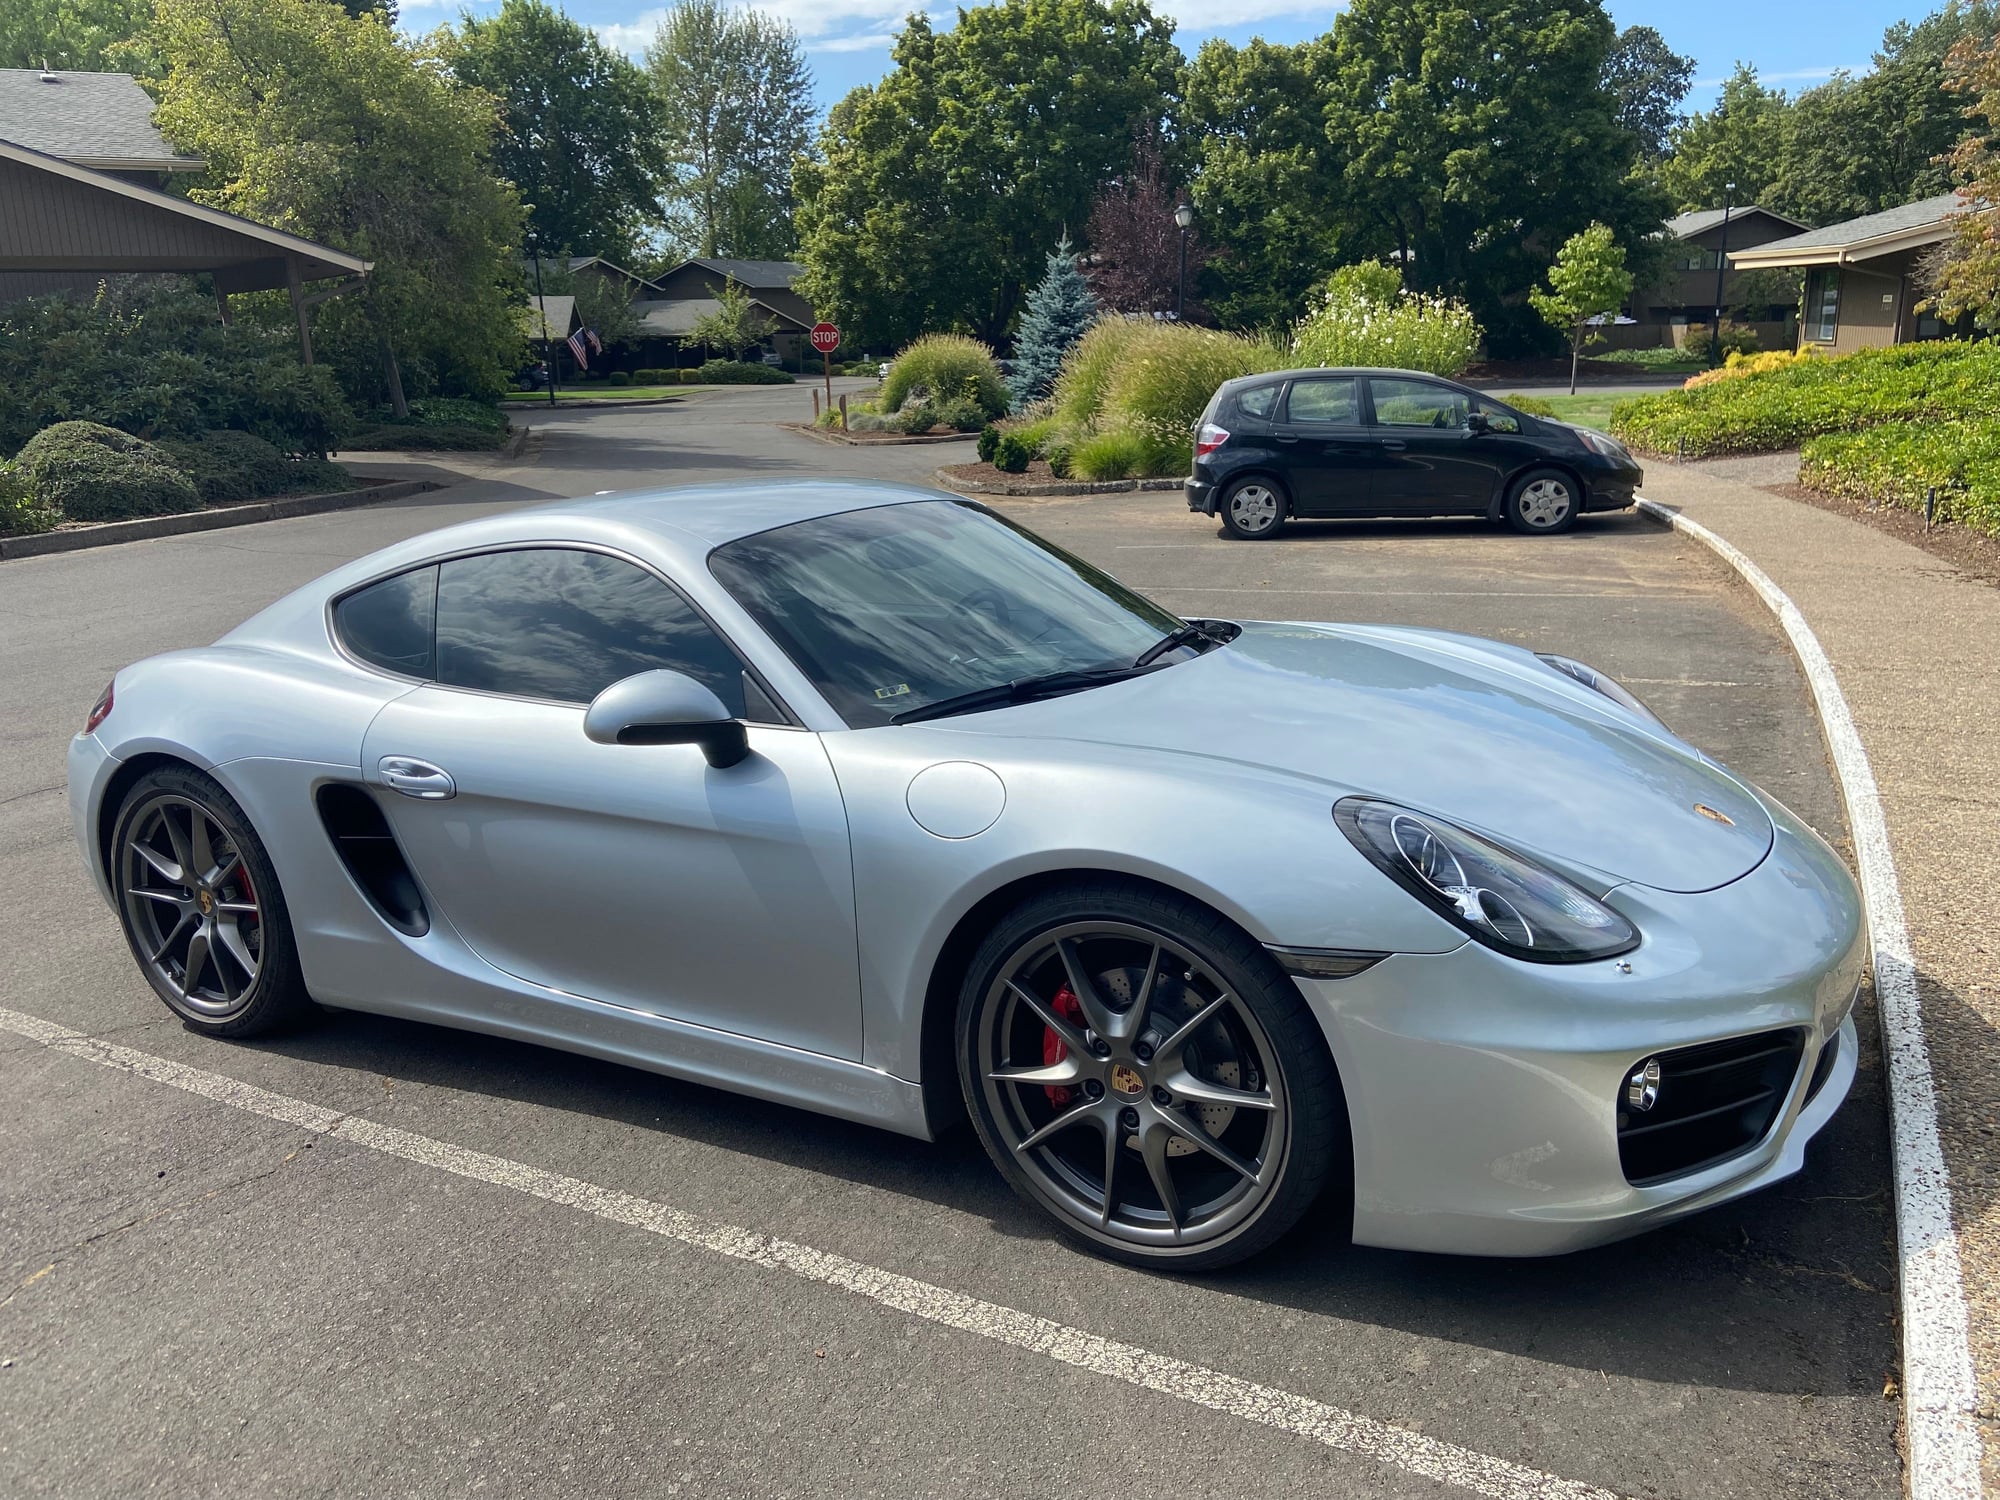 2014 Porsche Cayman - 2014 Cayman S PDK - Rhodium Silver - Full Leather Interior in Black/Luxor Beige - Used - VIN WPOAB2A8XEK193526 - 59,000 Miles - 6 cyl - 2WD - Automatic - Coupe - Silver - Eugene, OR 97408, United States